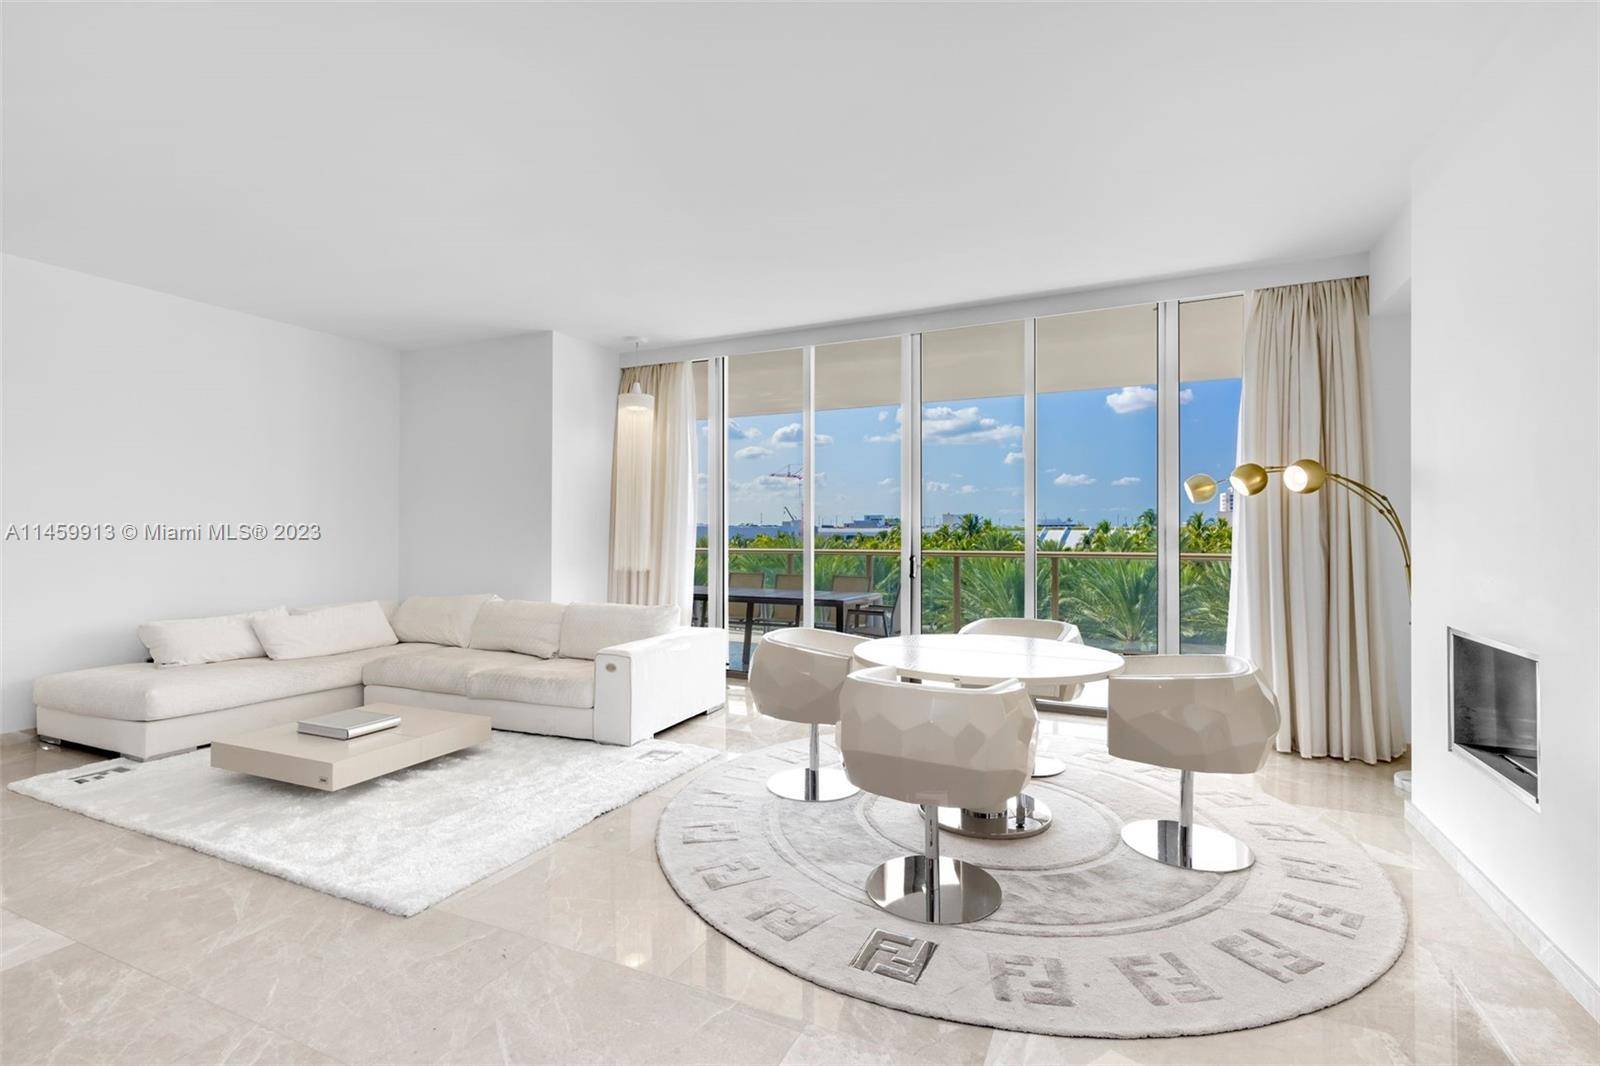 A spectacular one of a kind residence, elegantly designed with top of the line finishes, 100 decorated with Fendi furniture, stunning marble floors, and high end appliances.